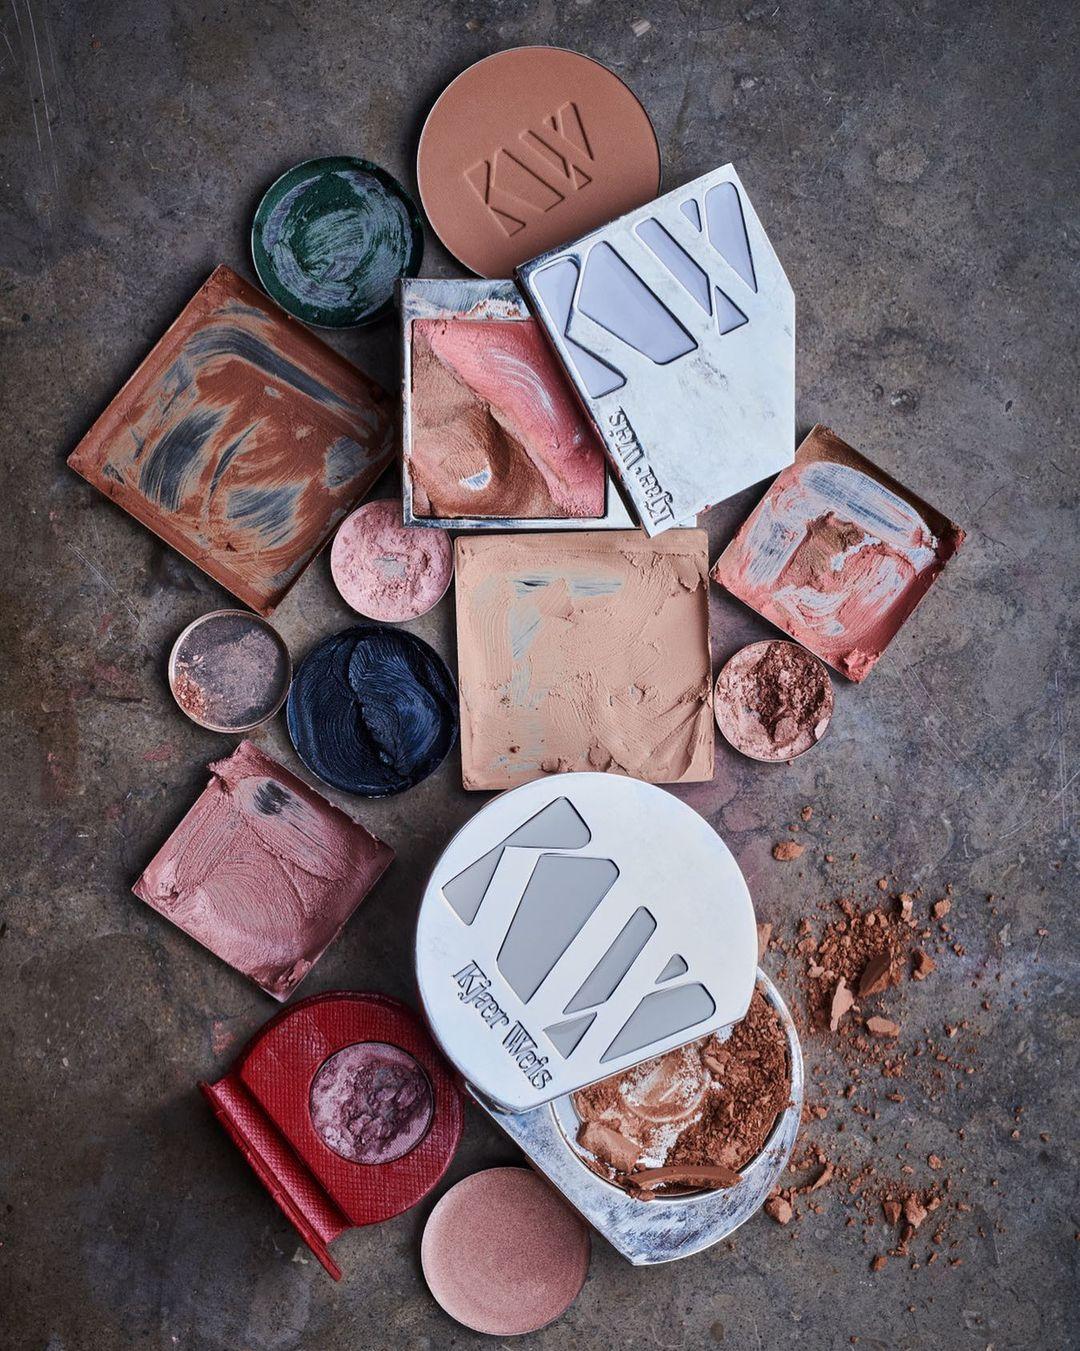 class="content__text"
 We are always conscious about what we put out into the world, which is why we use only the best ingredients in our products 🙌 every single ingredient in a Kjaer Weis product has been carefully considered for its ability to work with the skin, not against it...it's safe to say your skin will thank us ✨ 
 